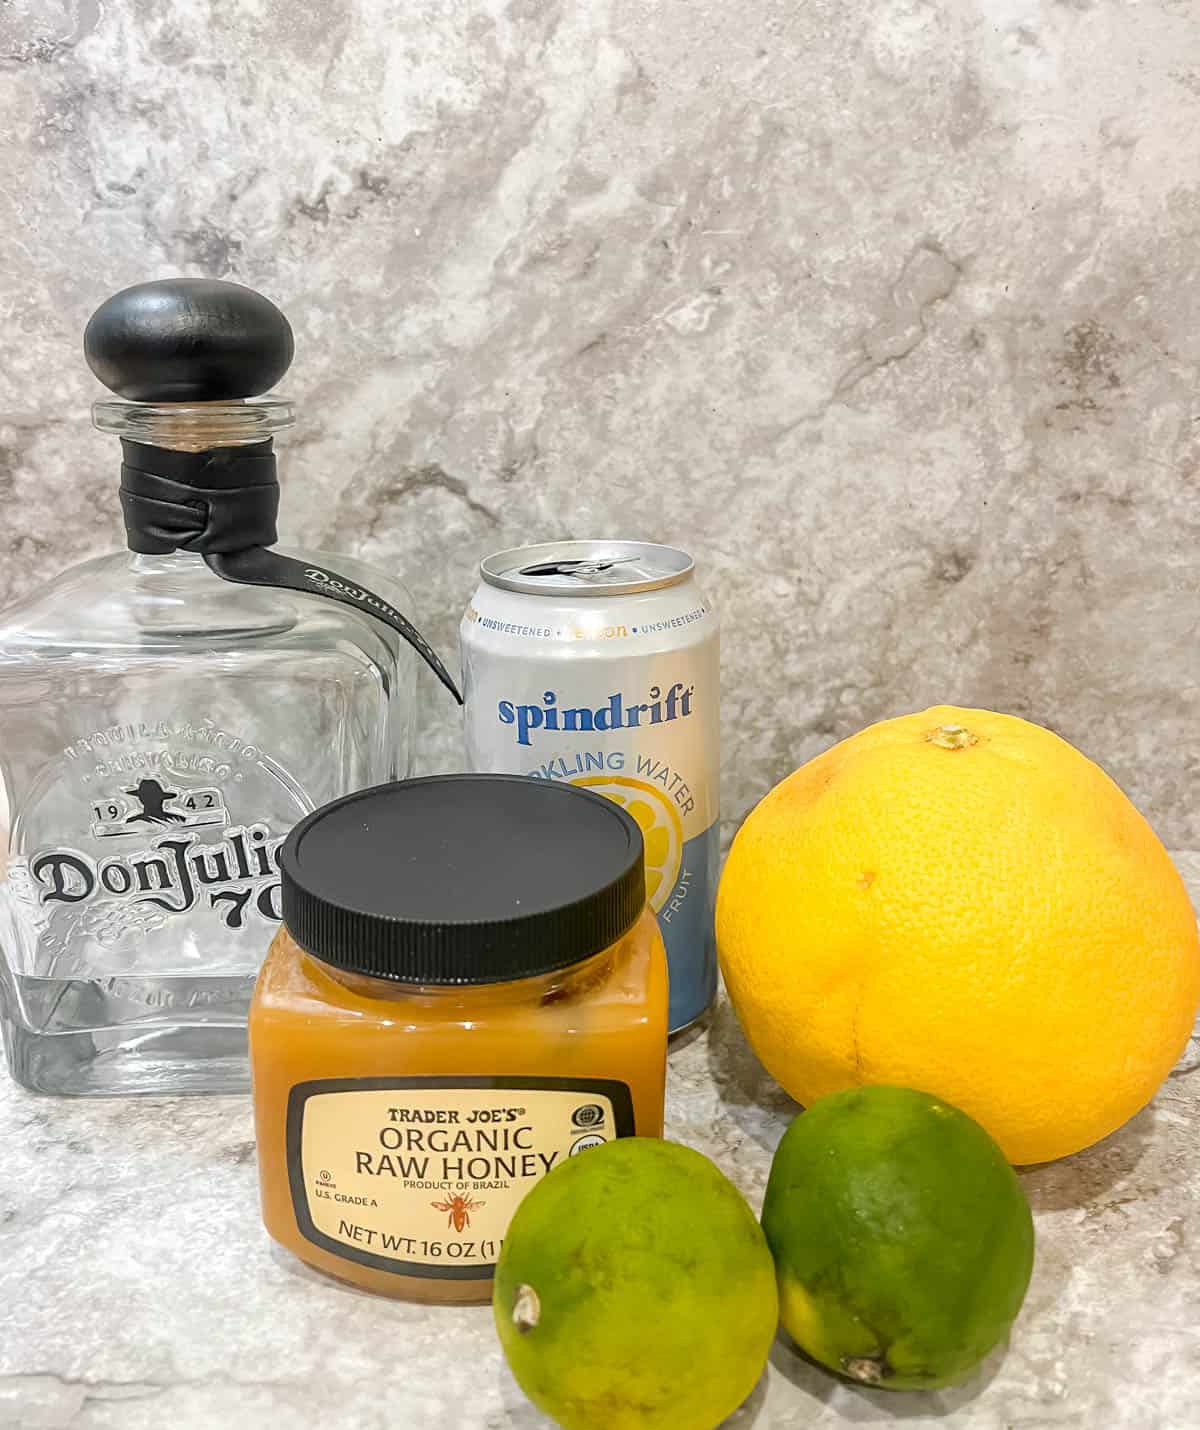 Ingredients needed to make a homemade paloma cocktail.